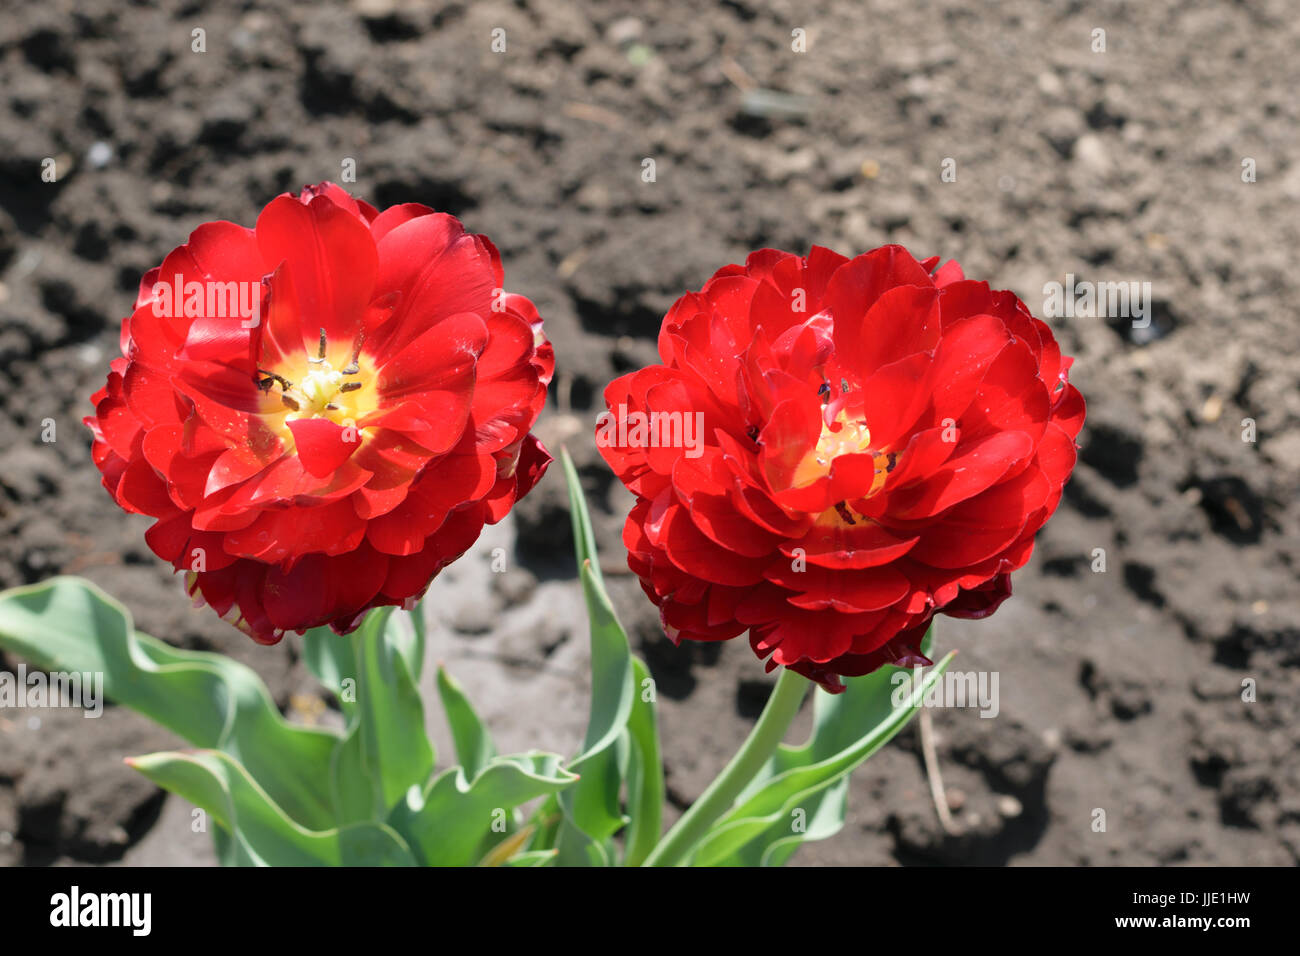 two Double Bowl-Shaped red tulips Stock Photo